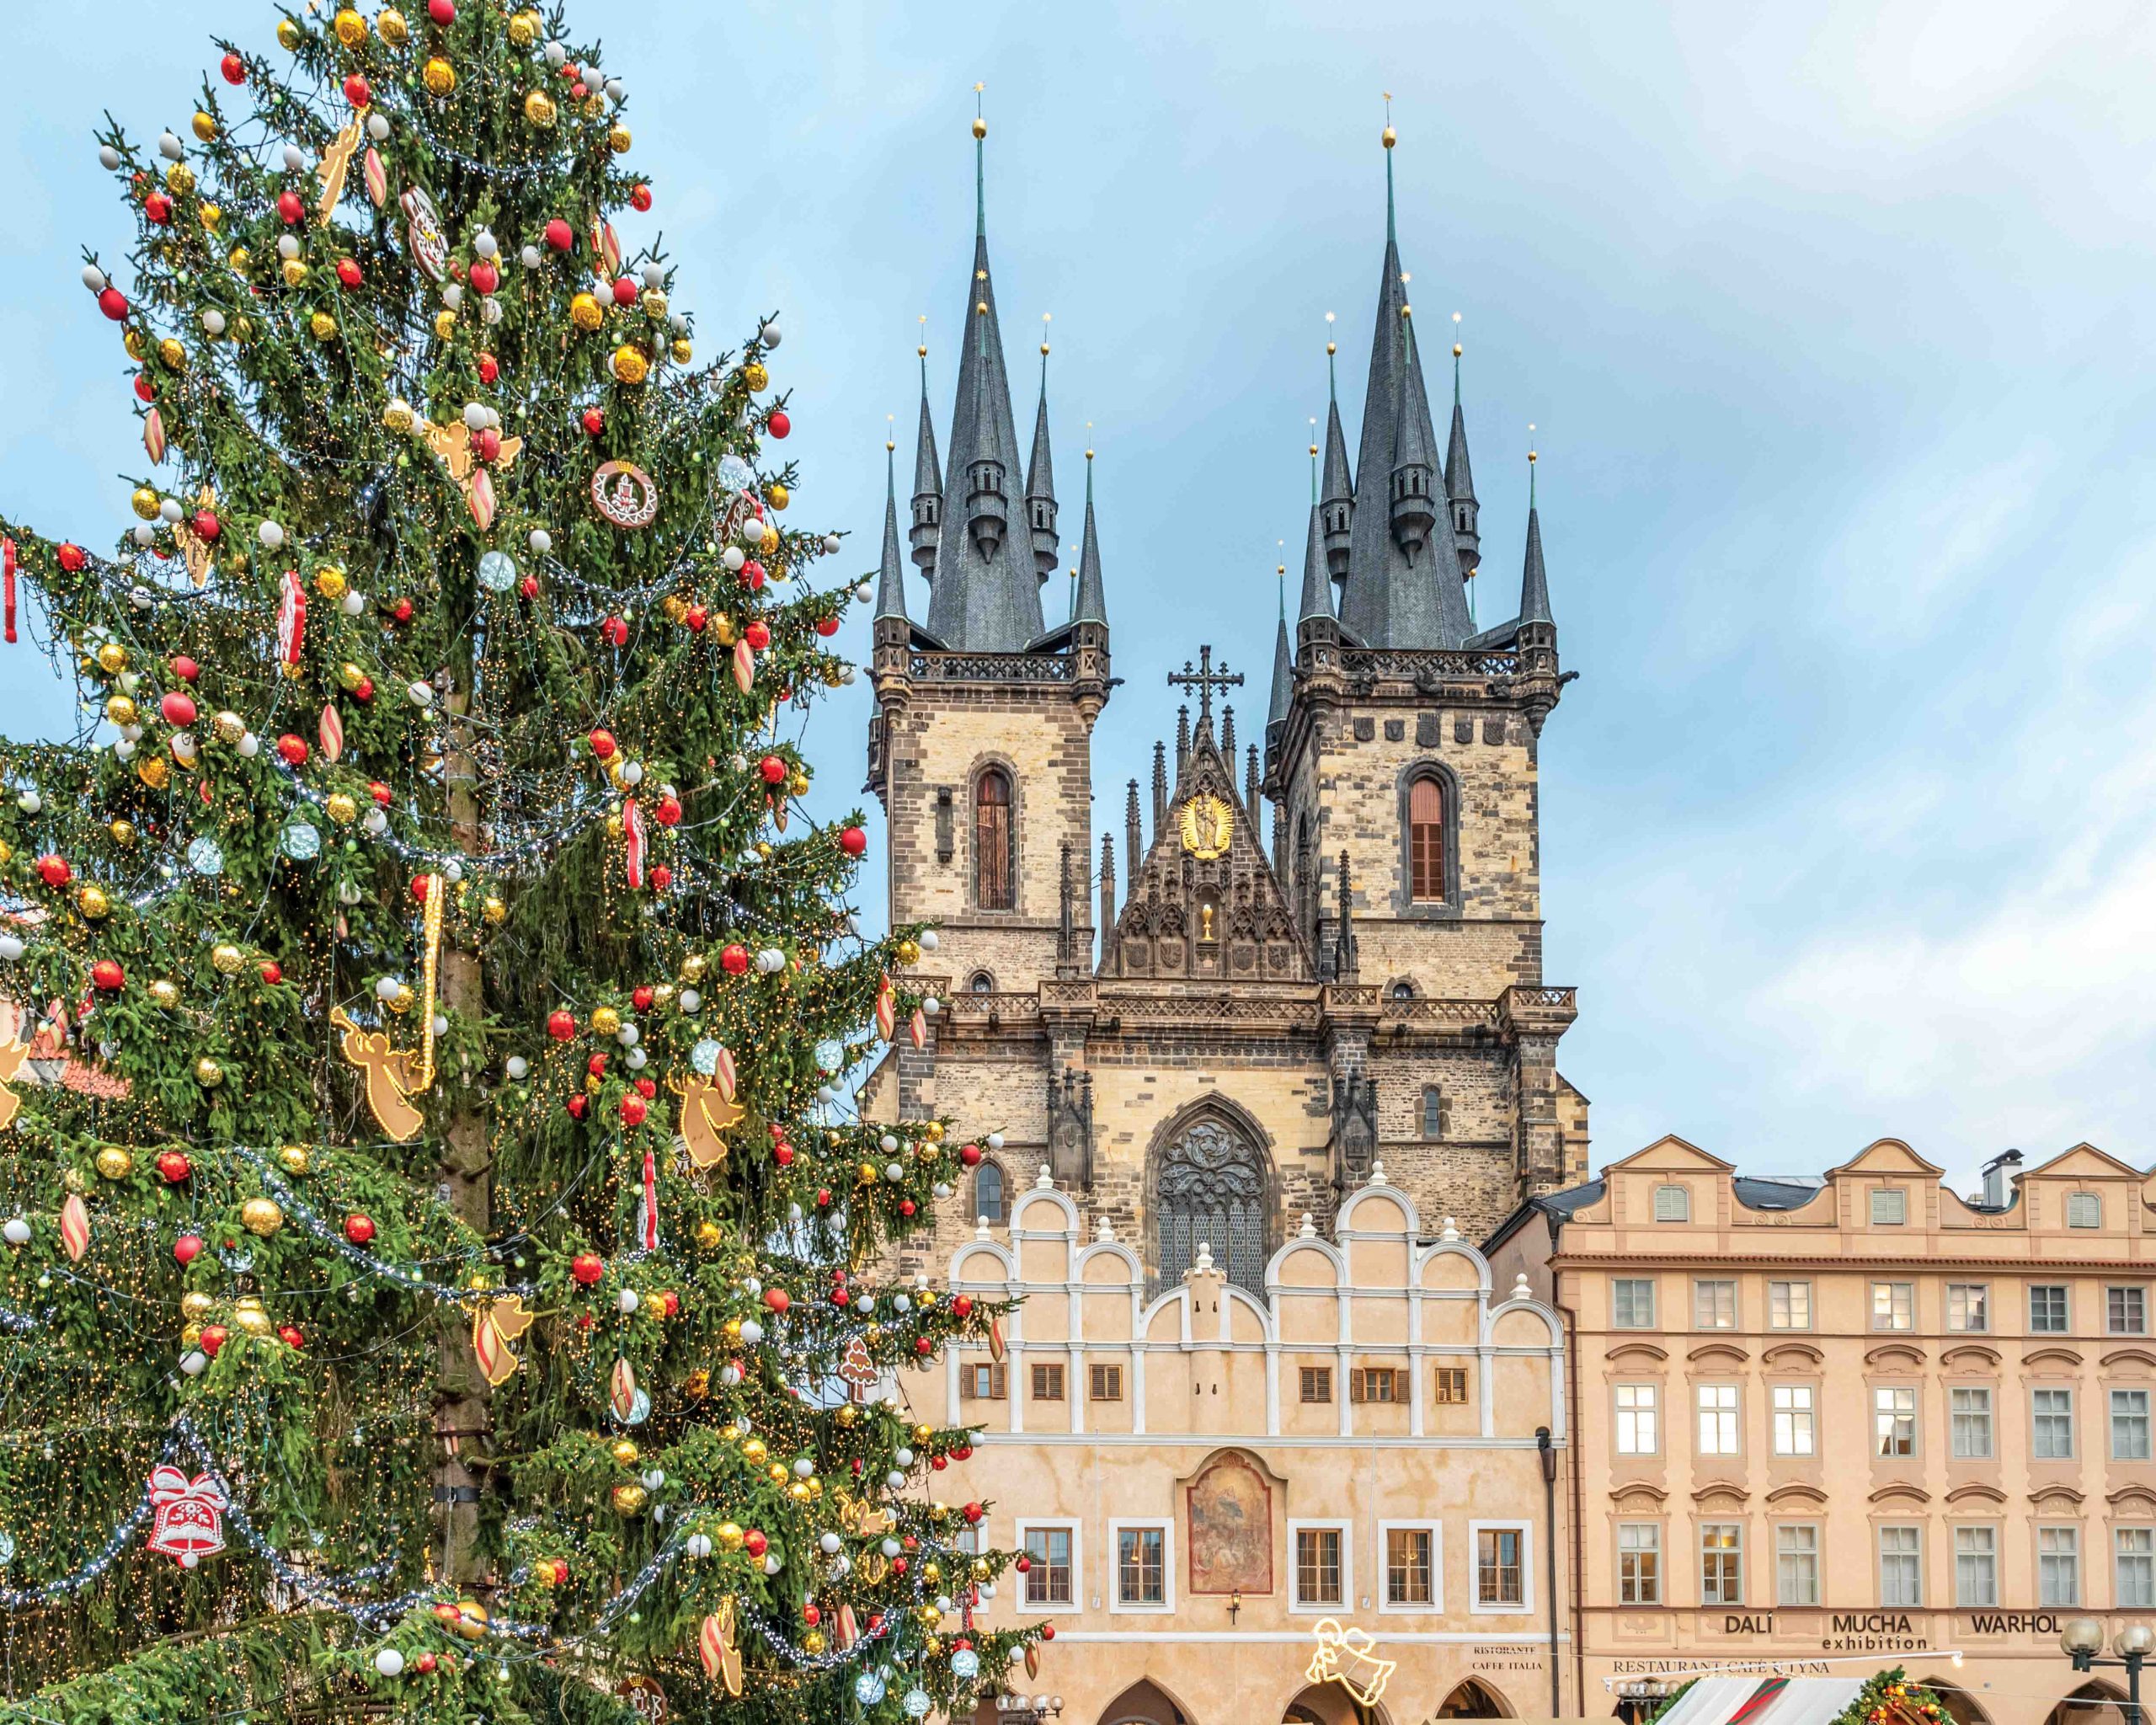 In Prague, the towering spires of the Church of Our Lady before Tyn rise above the square, with a decorated evergreen in the foreground.